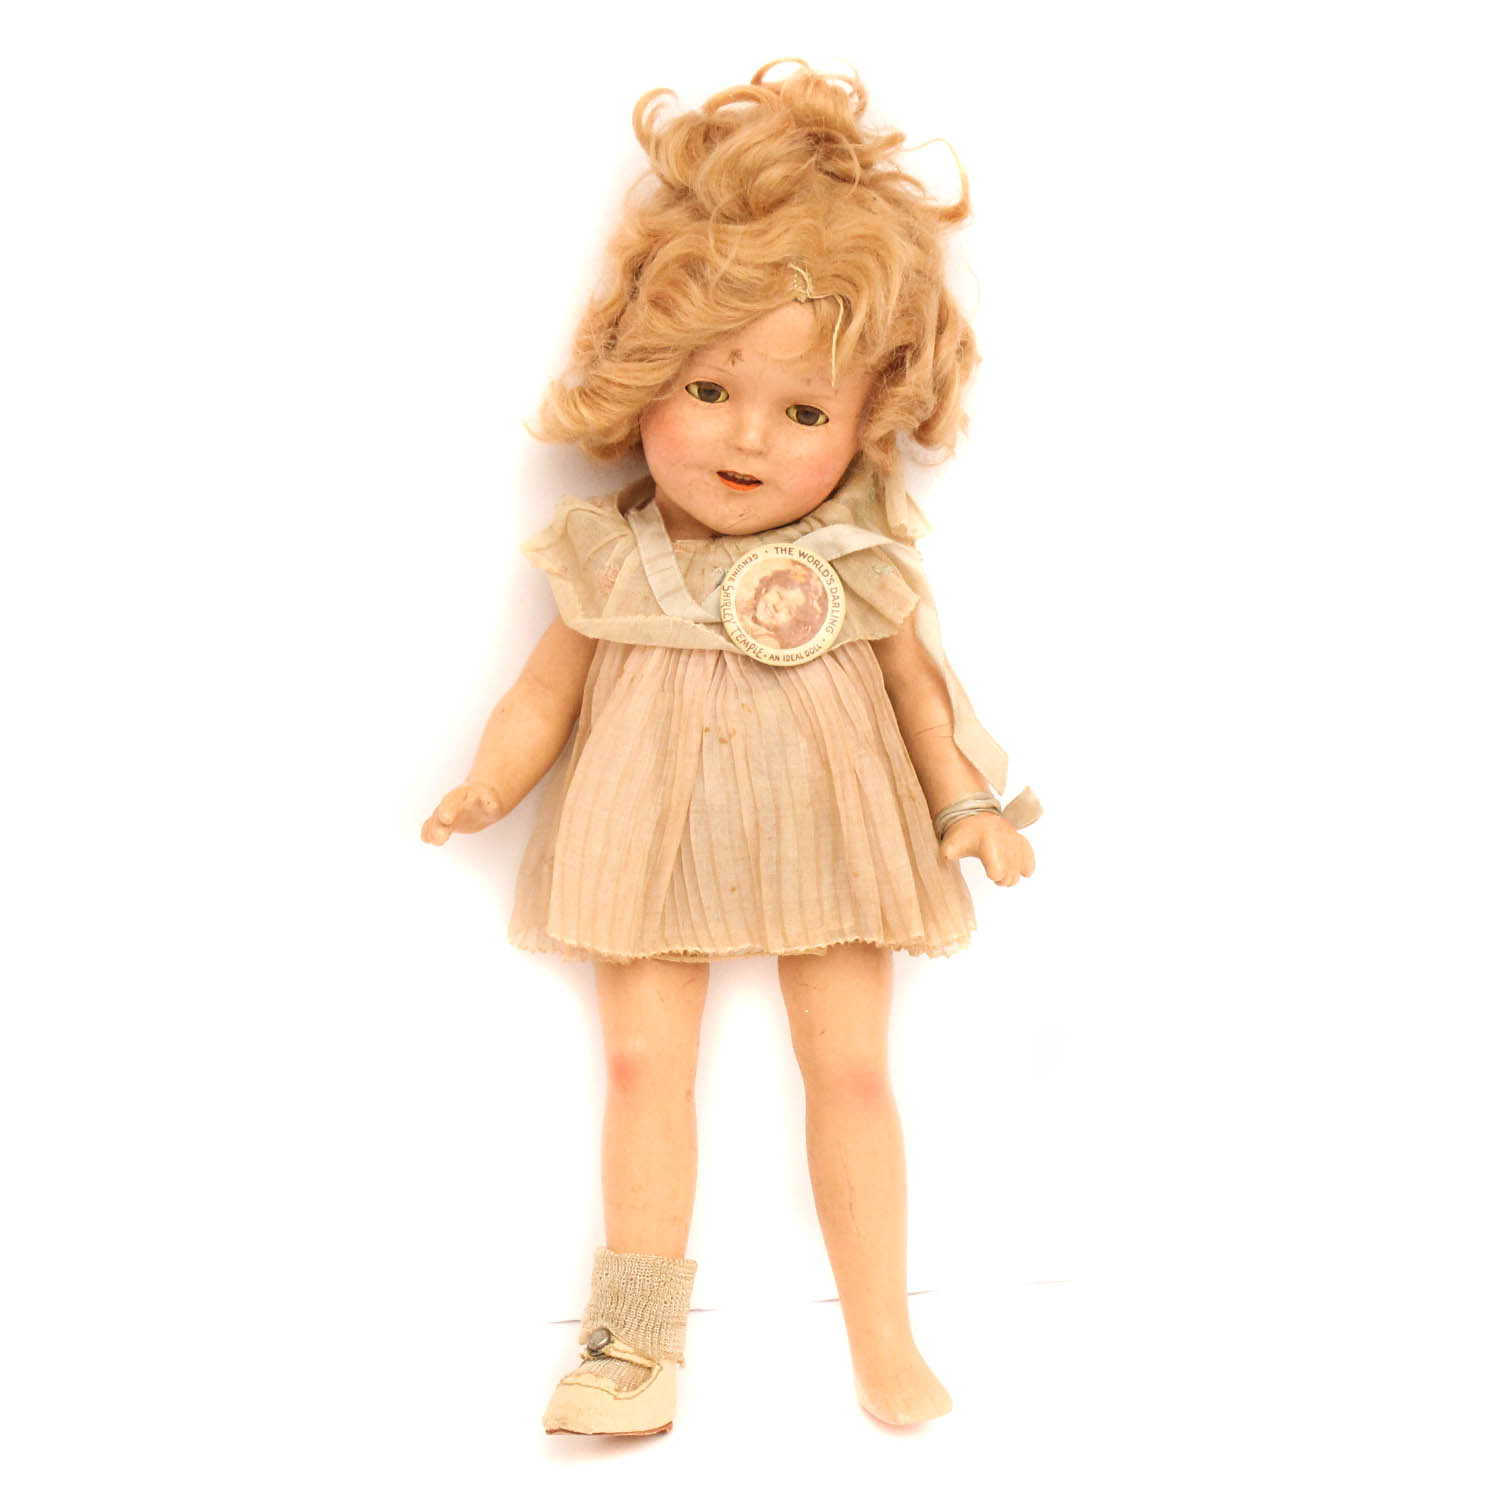 1930 shirley temple doll value